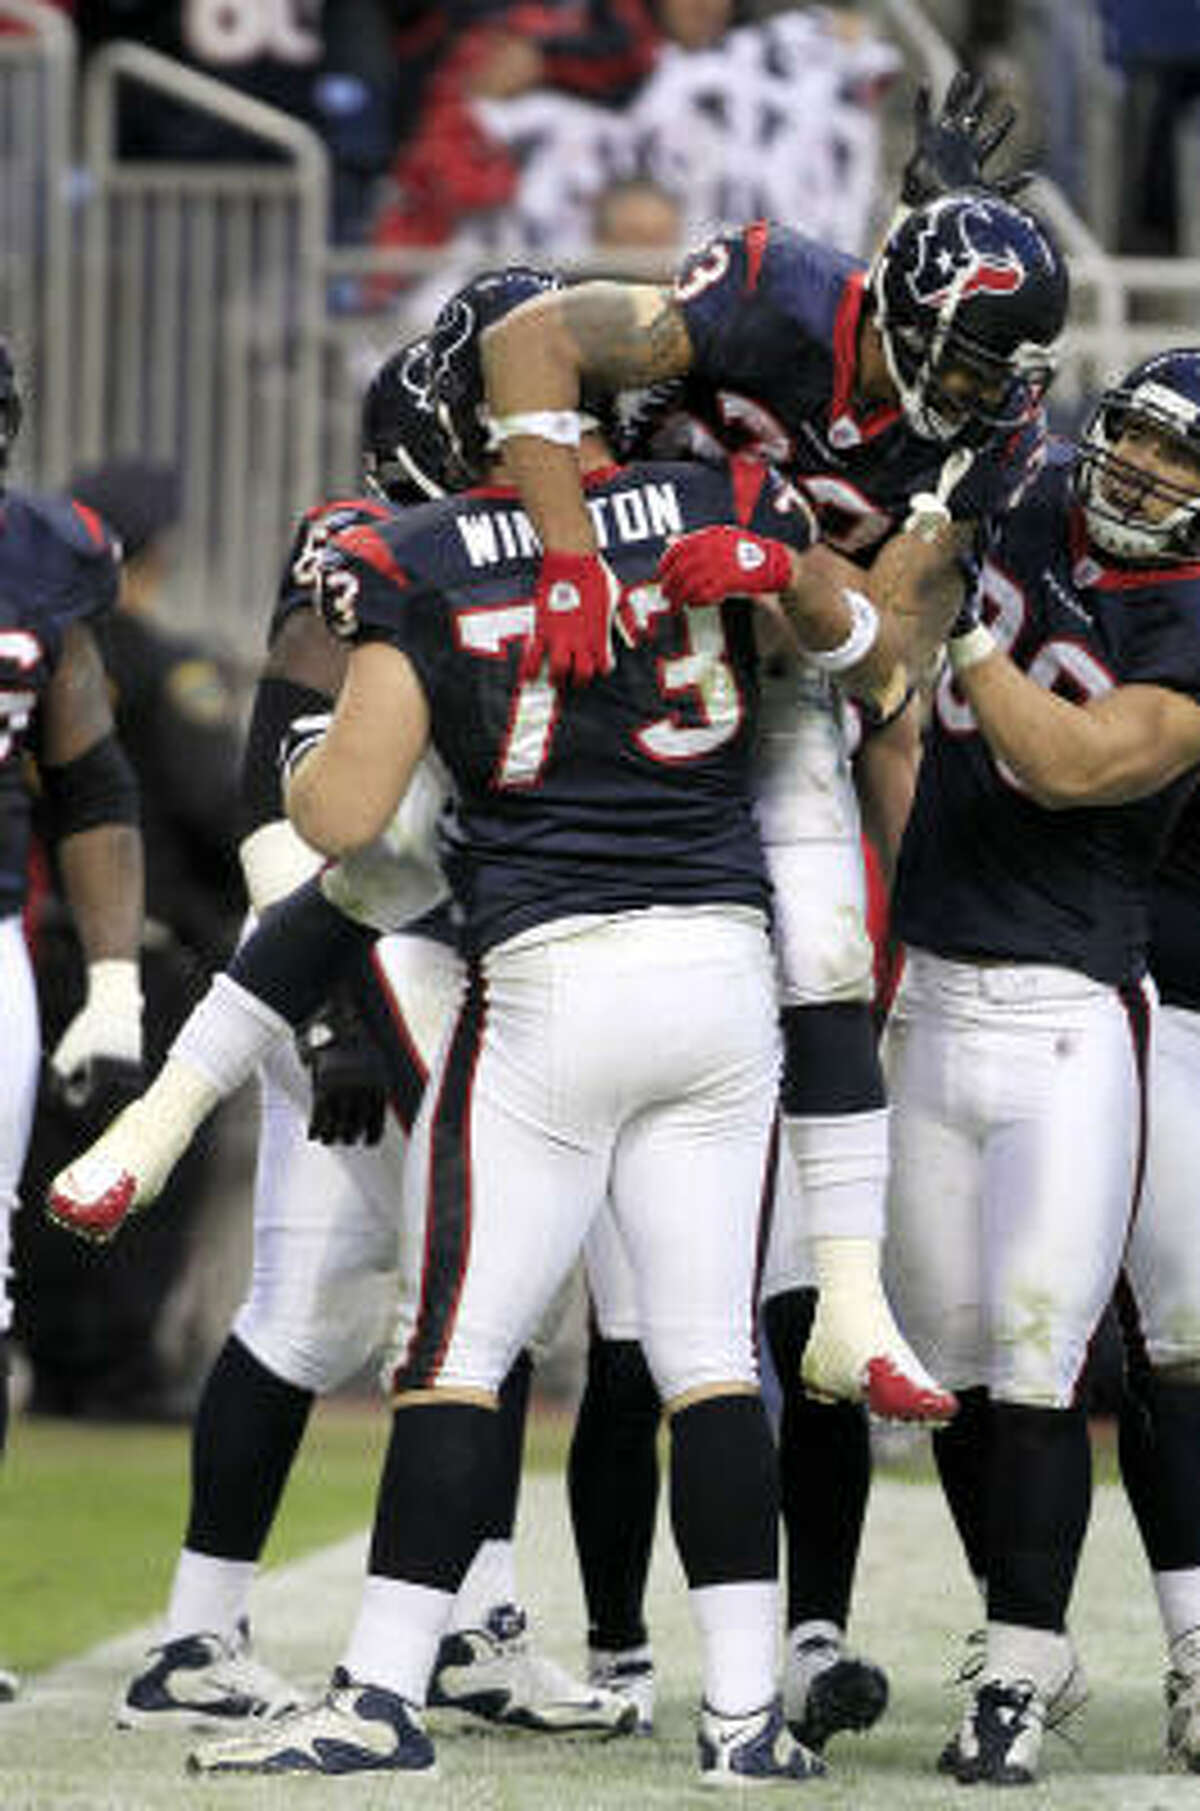 Texans running back Arian Foster is lifted in the air by offensive tackle Eric Winston (73) after Foster scored on a 35-yard touchdown run in the fourth quarter. Foster rushed for 180 yards on 31 carries in the victory.